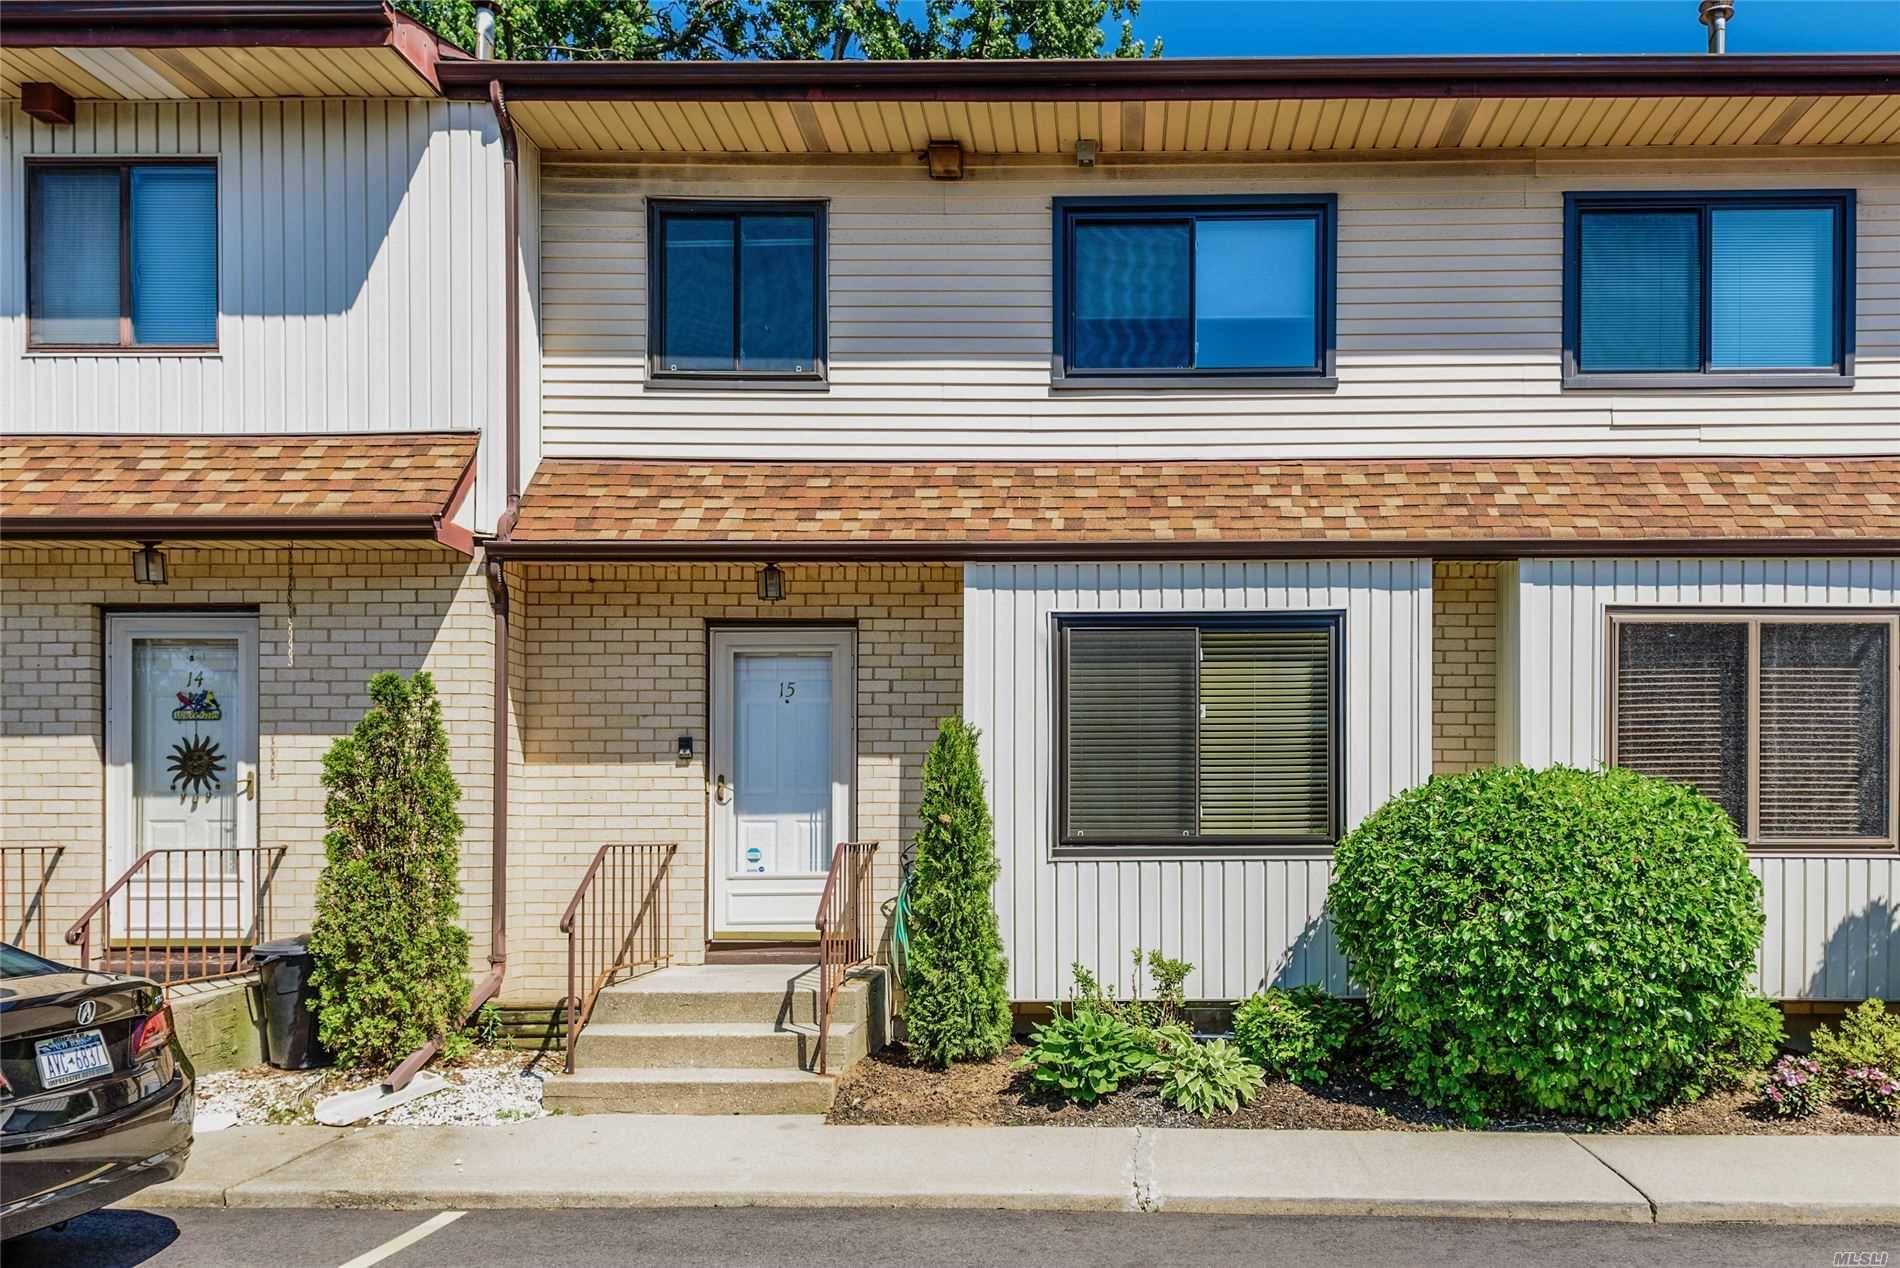 This bright and spacious updated townhouse features a granite kitchen with new appliances, new windows and new sliders leading to a backyard with a gas line for BBQ and entertaining.